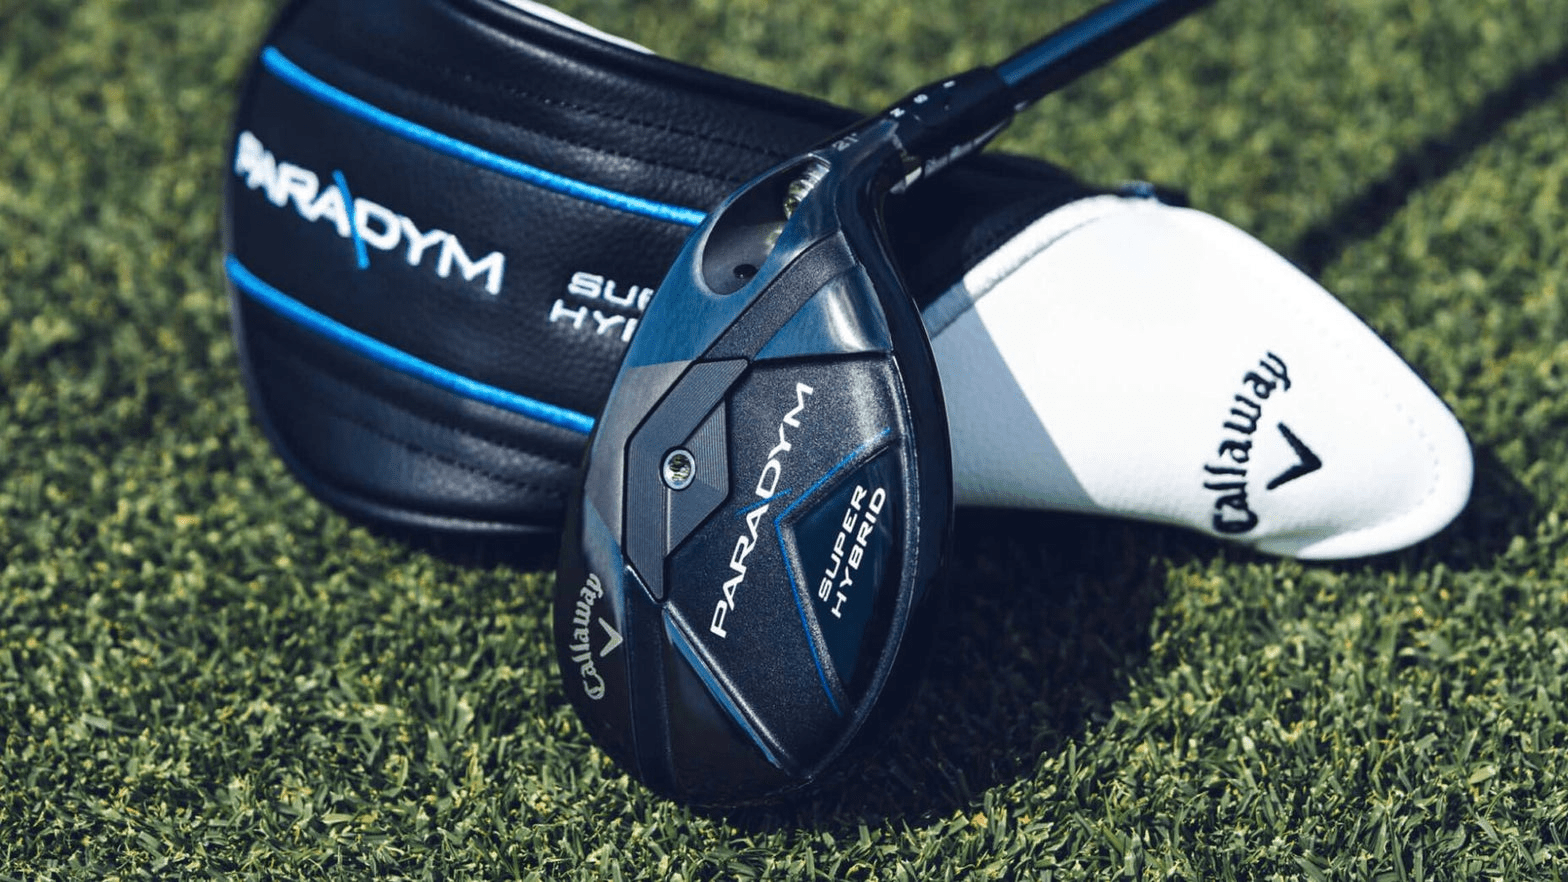 There’s a new putter and a Super Hybrid in town – the SoundTouch Putter and the Paradym Super Hybrid!